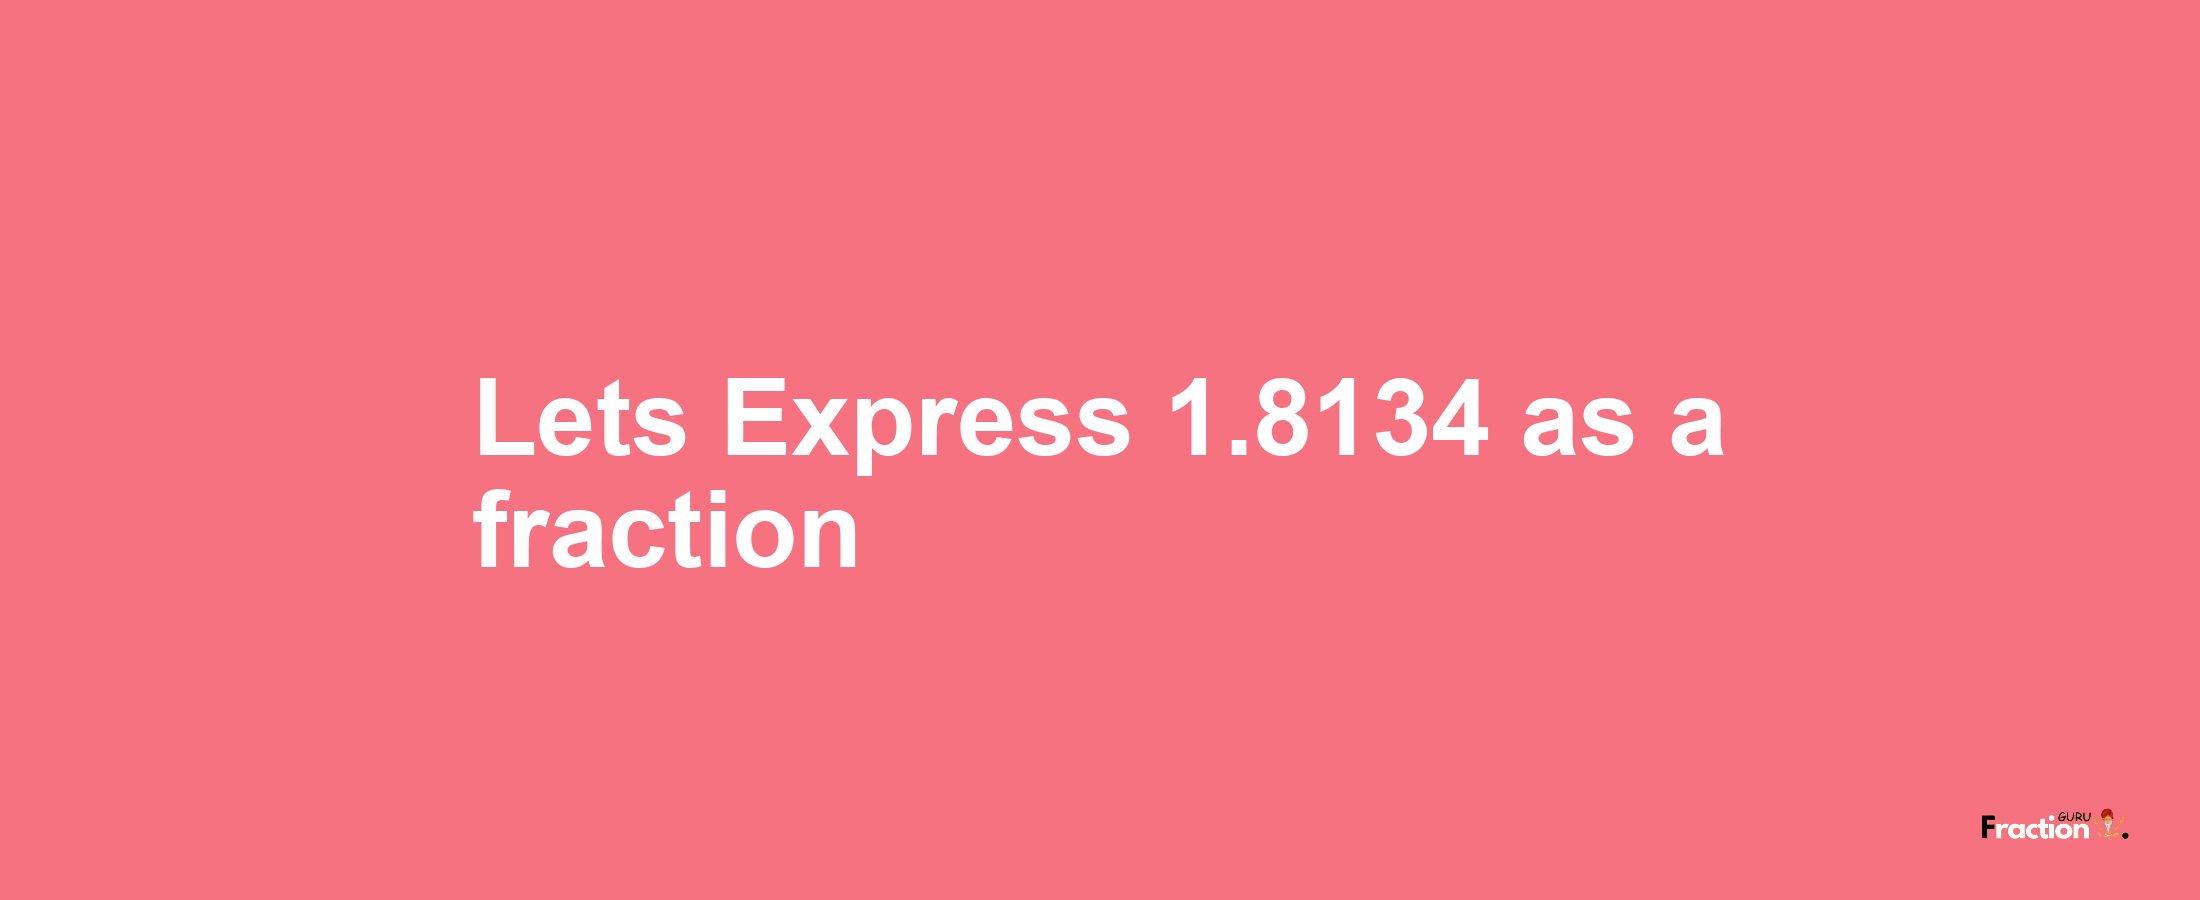 Lets Express 1.8134 as afraction